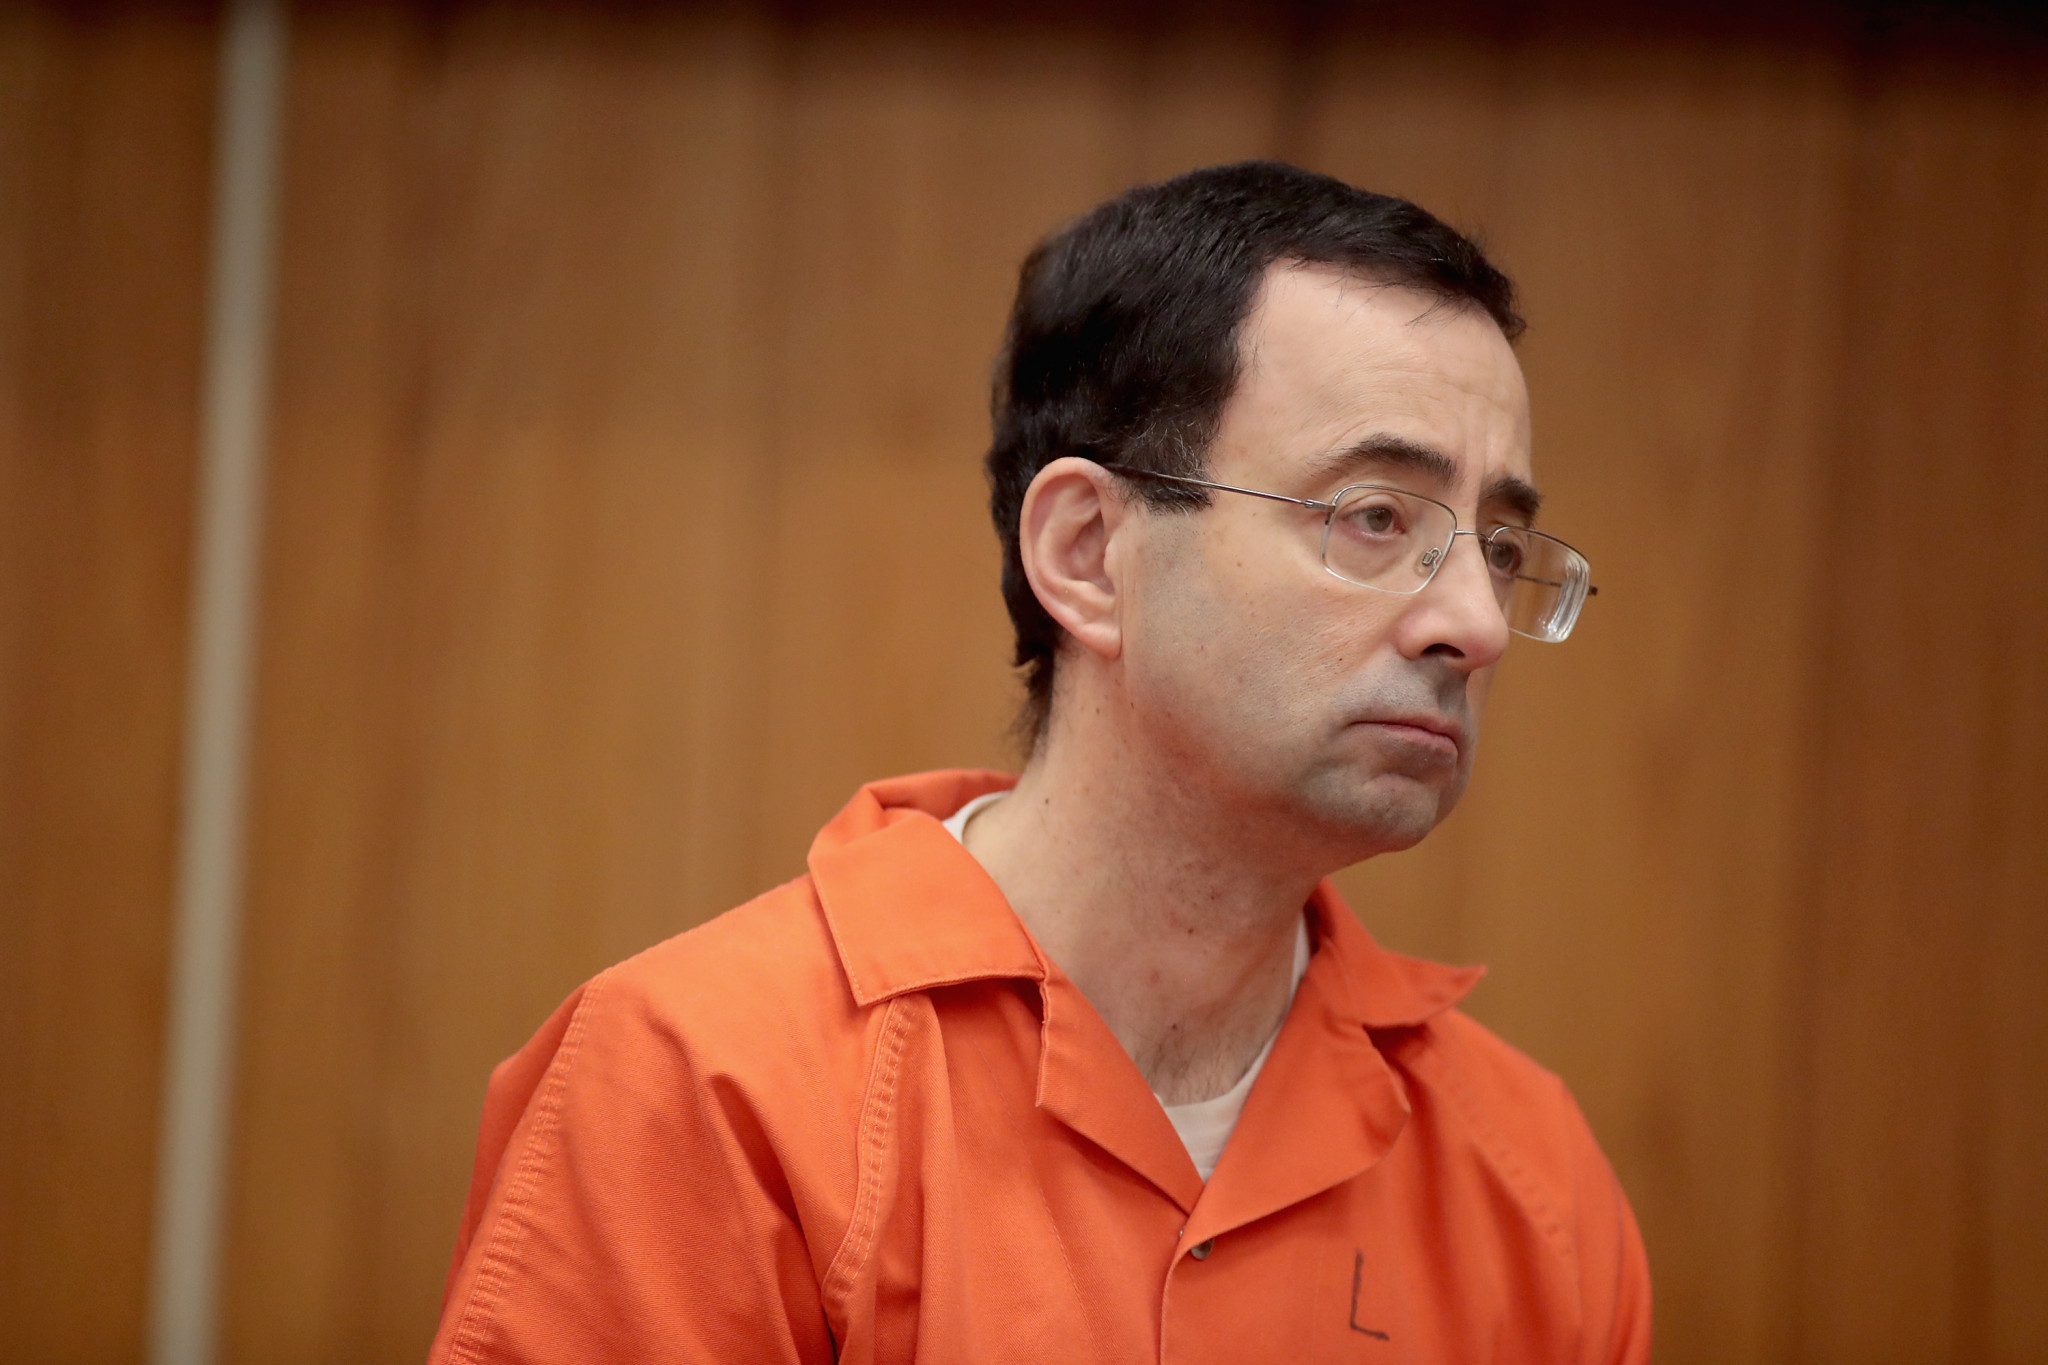 Former USA Gymnastics team doctor Larry Nassar is serving an effective life sentence for his crimes ©Getty Images